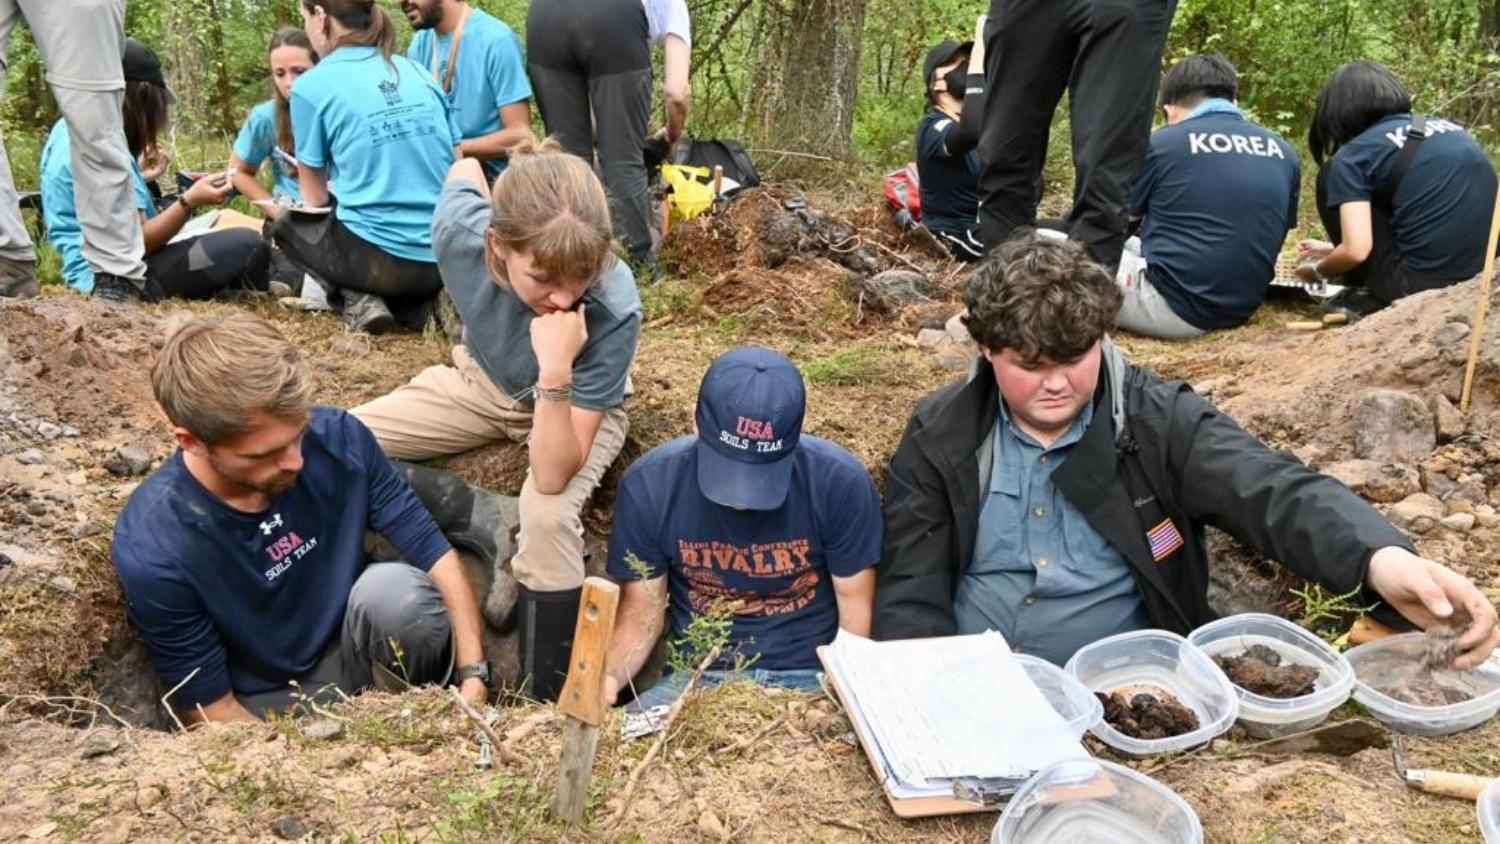 World Soil Judging Team USA practices in a Scottish mud pit